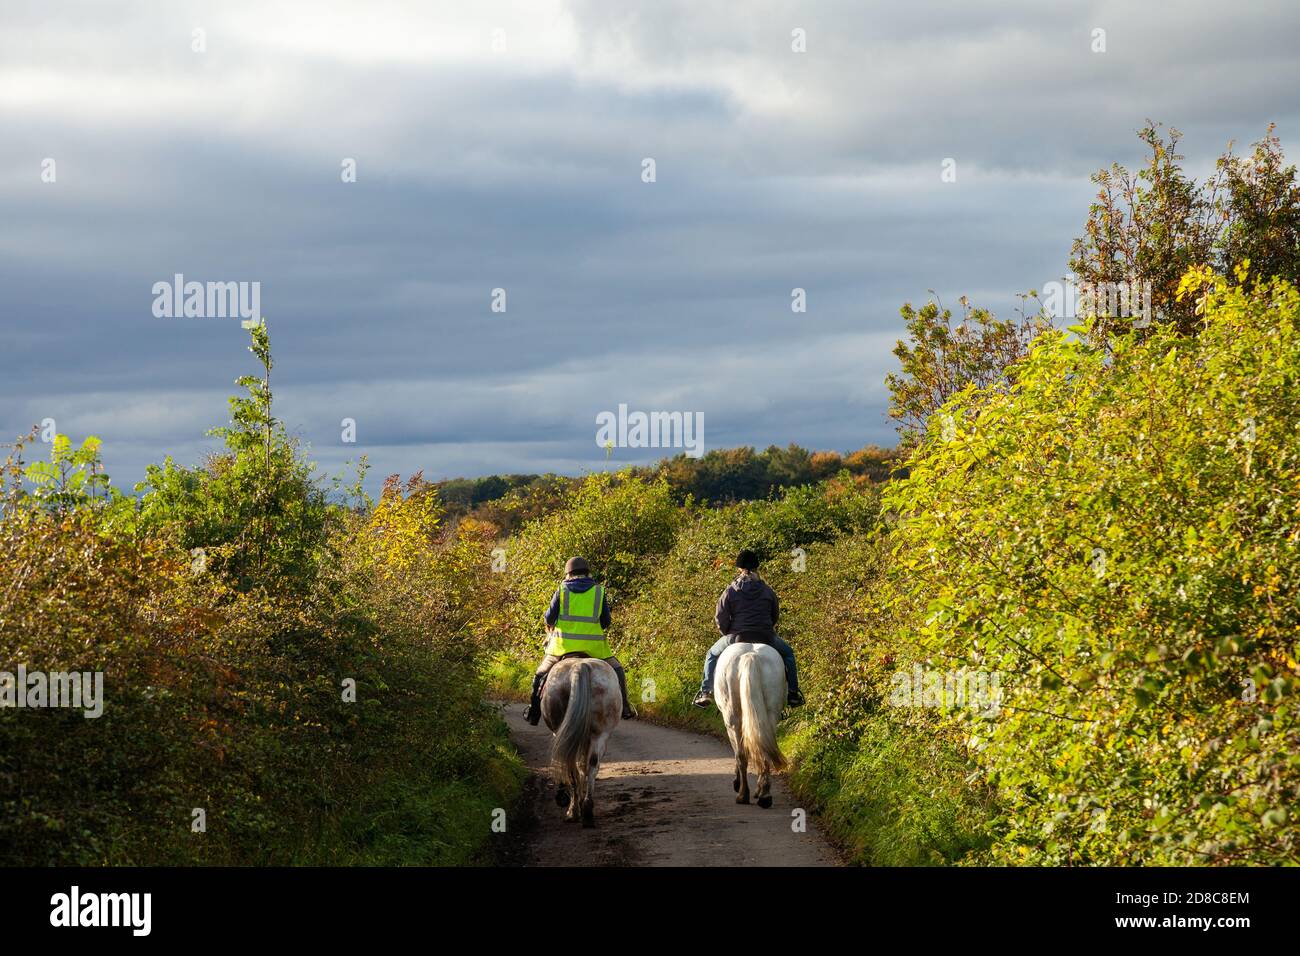 Two people riding their horses down a narrow country lane. Stock Photo